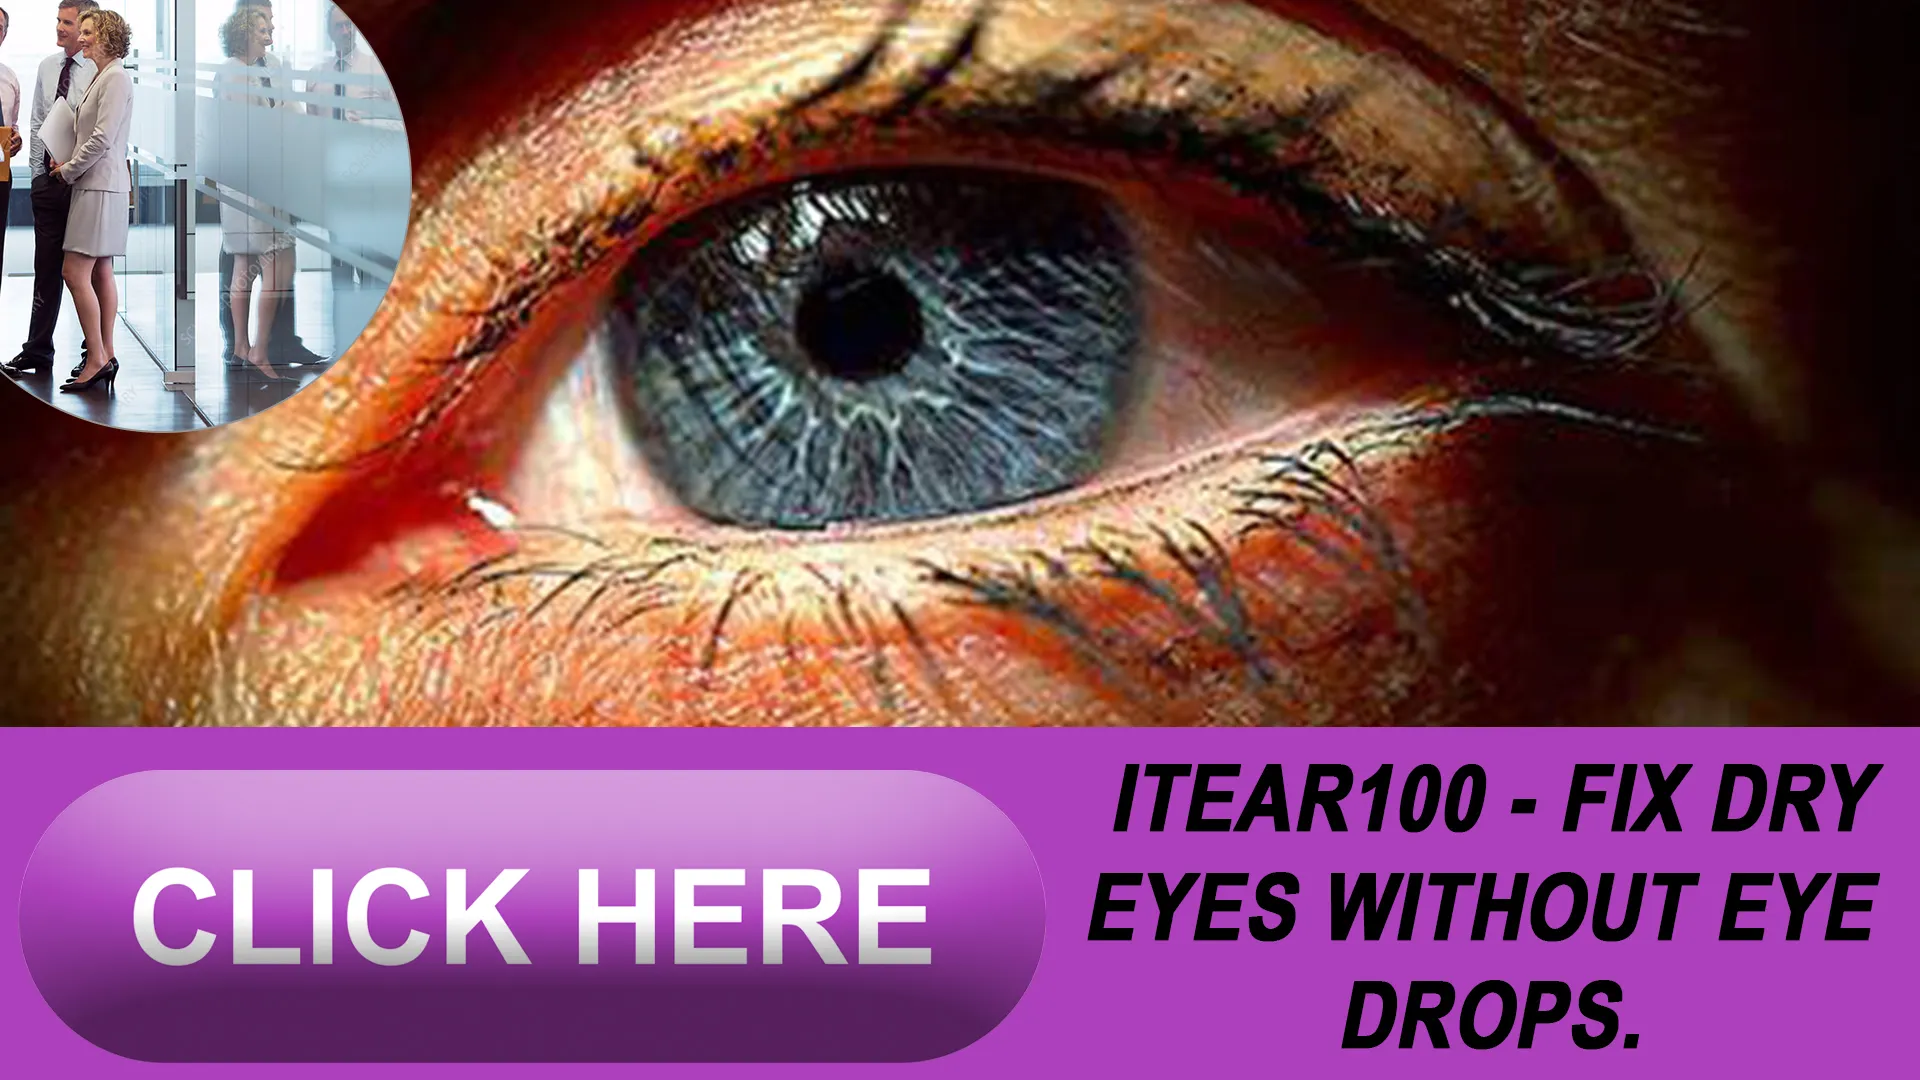 Experience the iTear100 Difference: Natural, Effective, Revolutionary